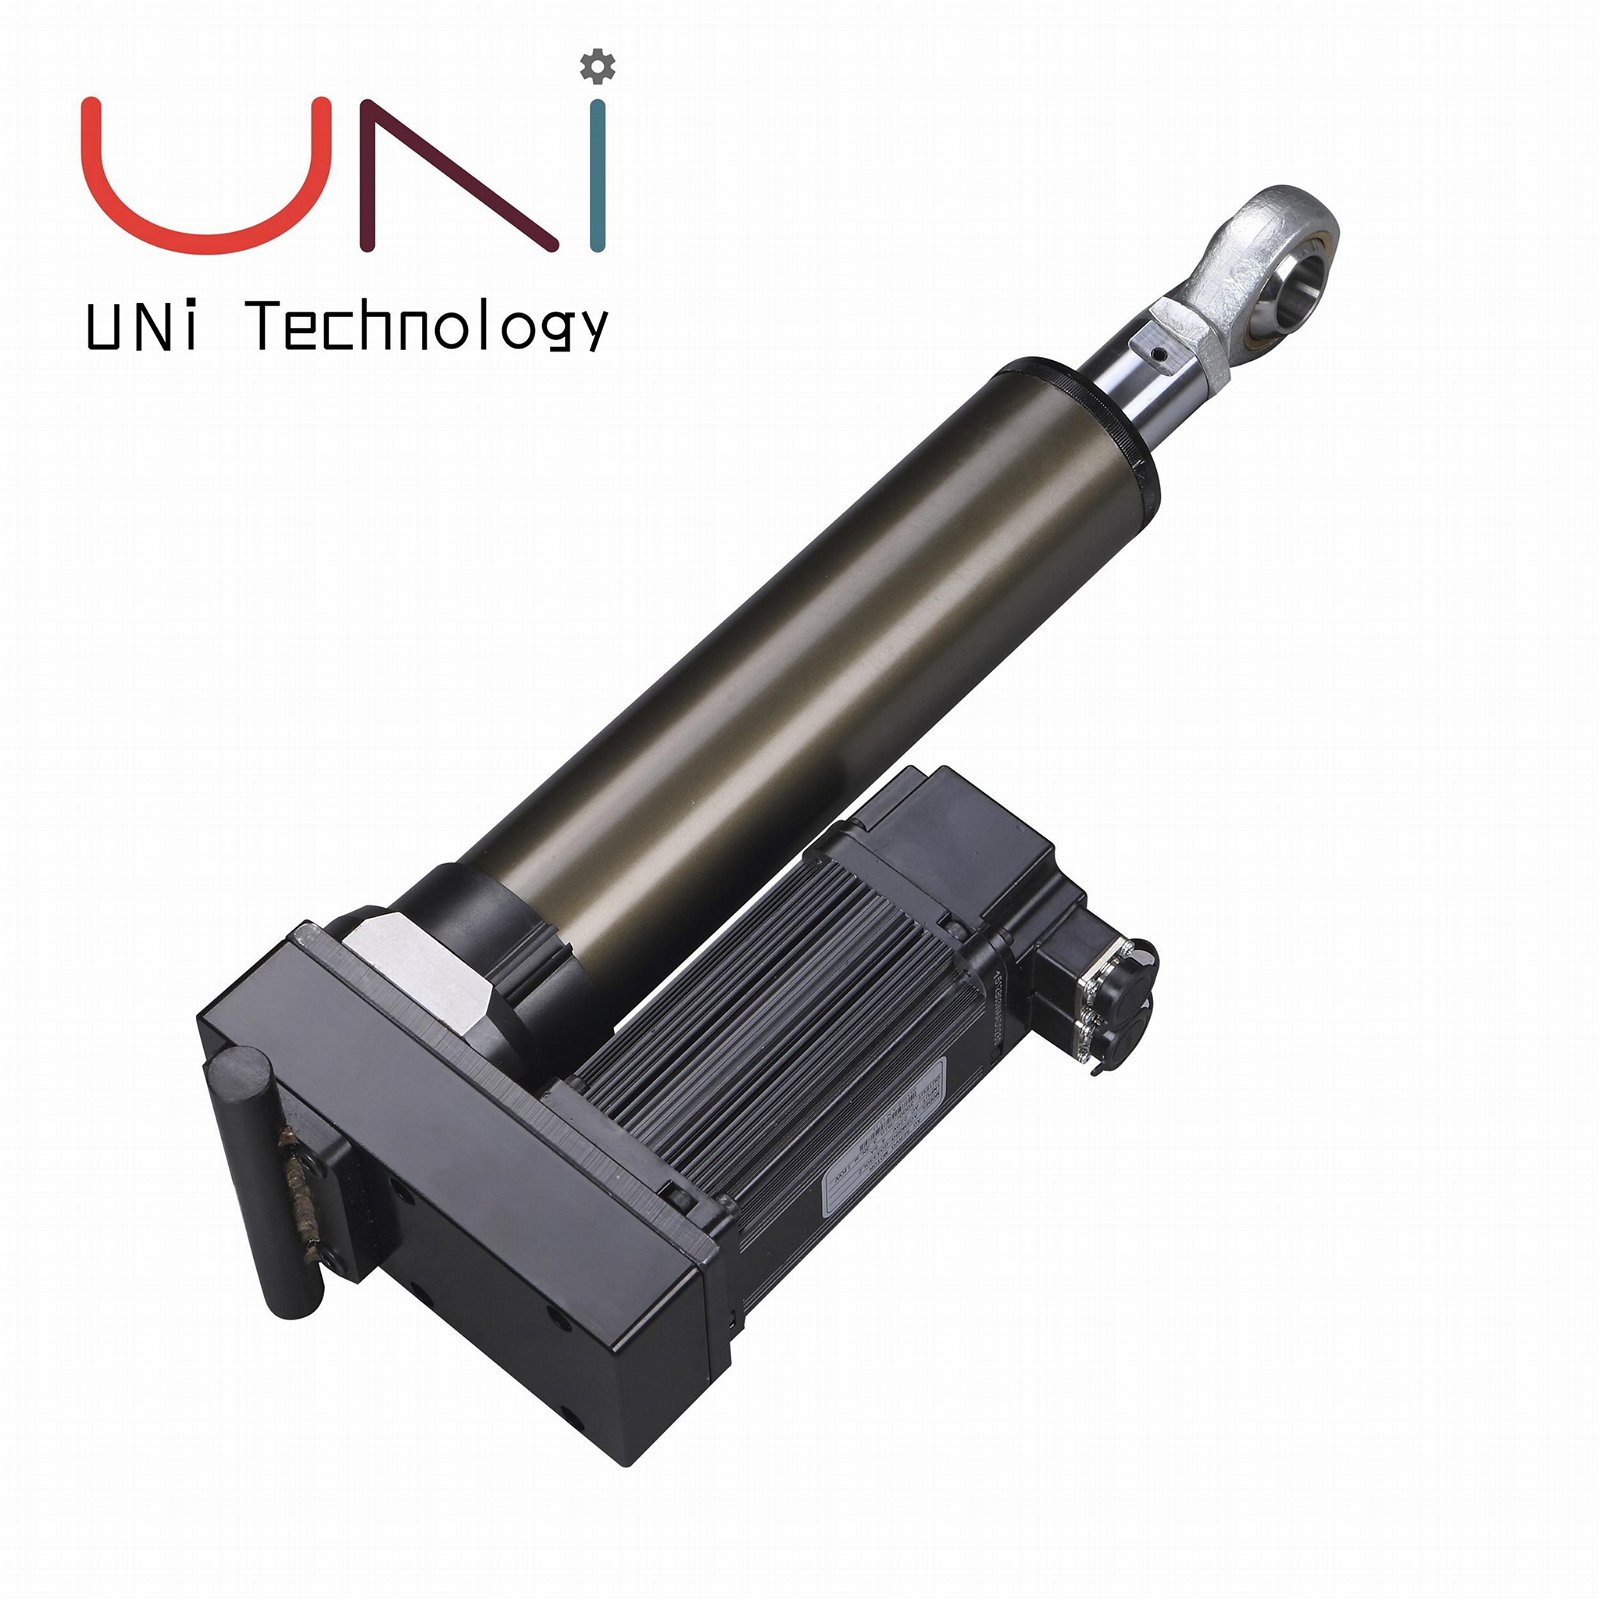 UNI 12V SMALL LINEAR ACTUATOR FOR 6 AXIS STEWART MOTION PLATFORM 3